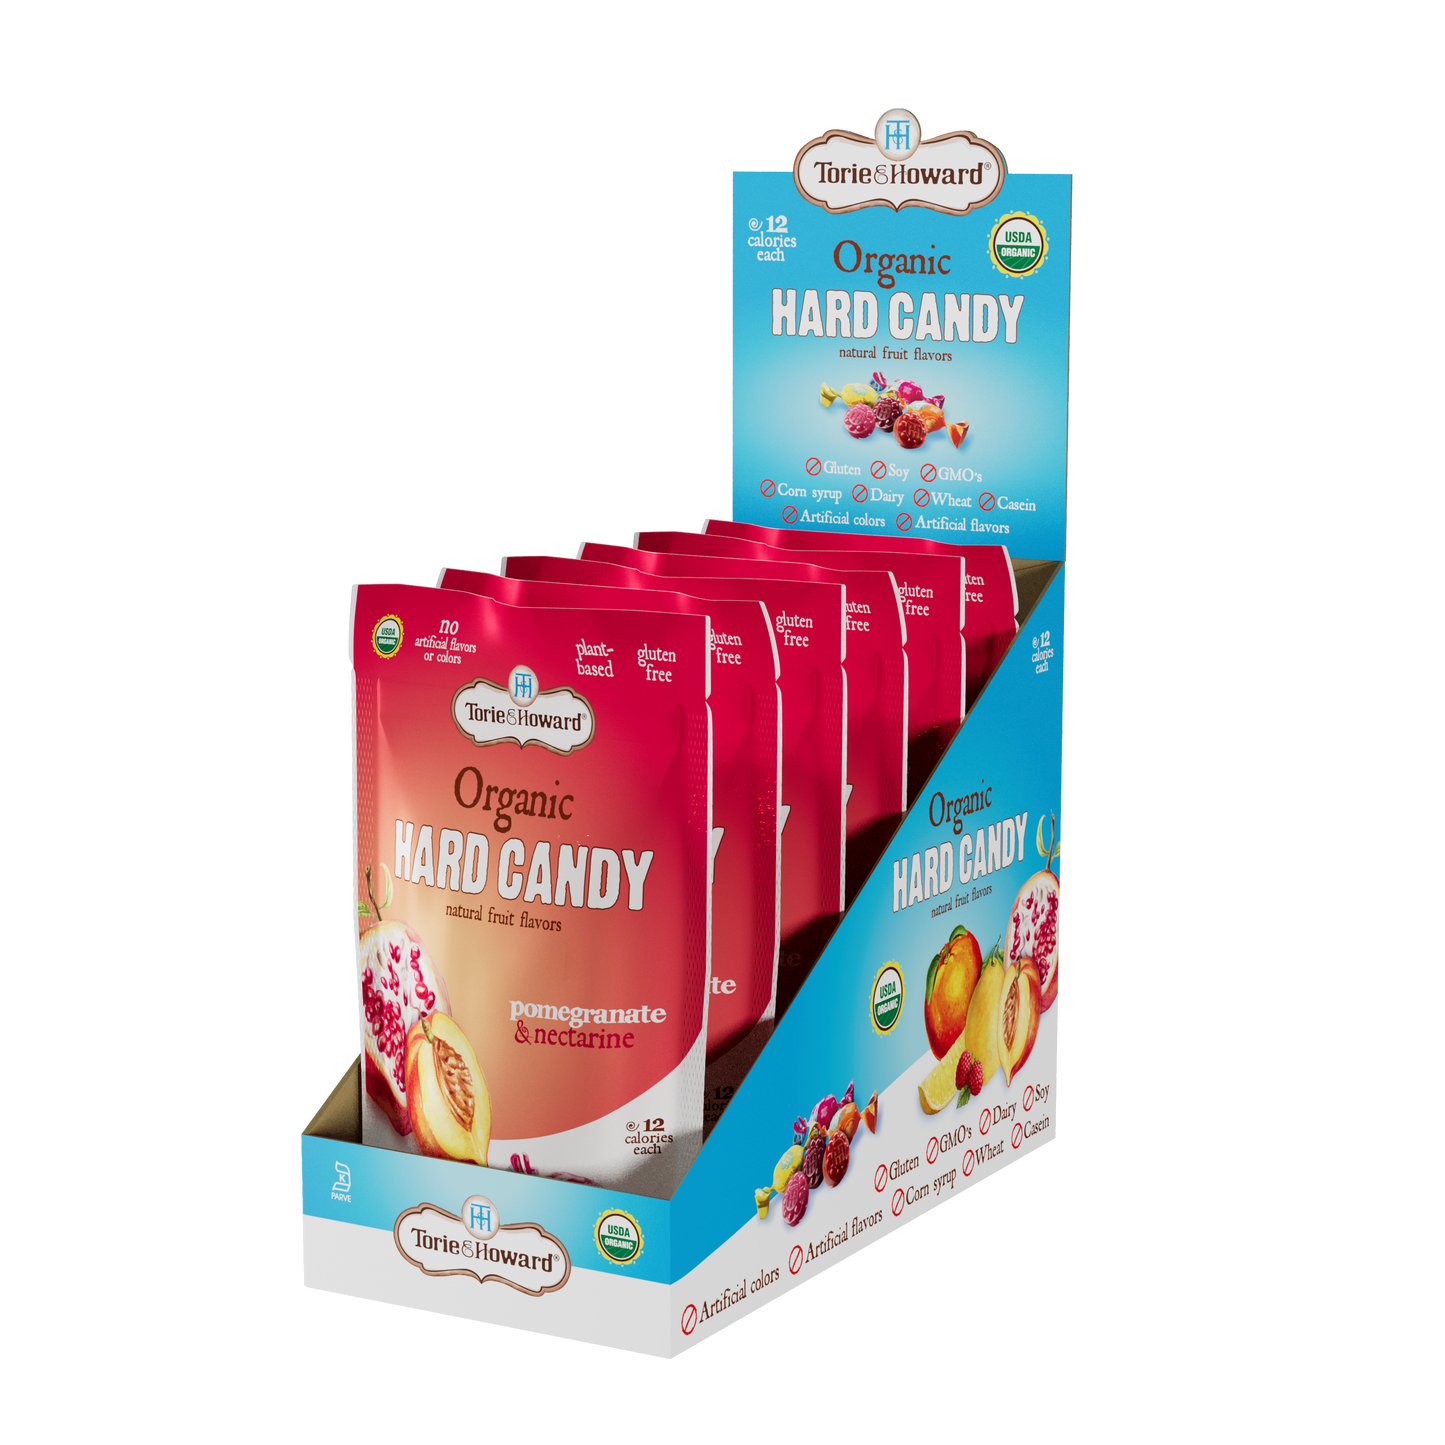 Display caddy containing 6, 3.5oz bags of Torie & Howard Pomegranate & Nectarine Organic Hard Candy, side view